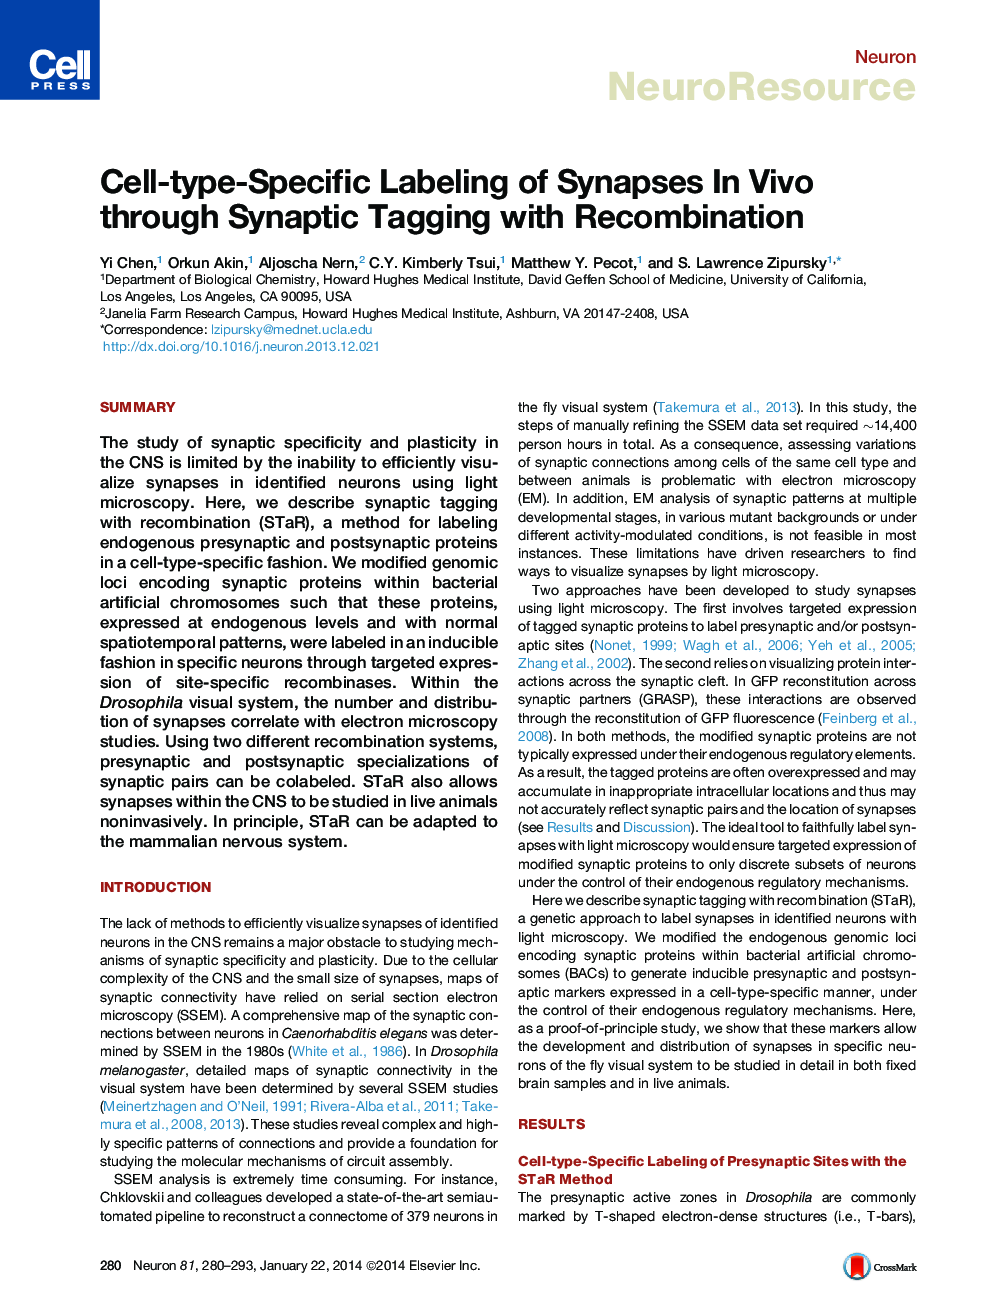 Cell-type-Specific Labeling of Synapses In Vivo through Synaptic Tagging with Recombination